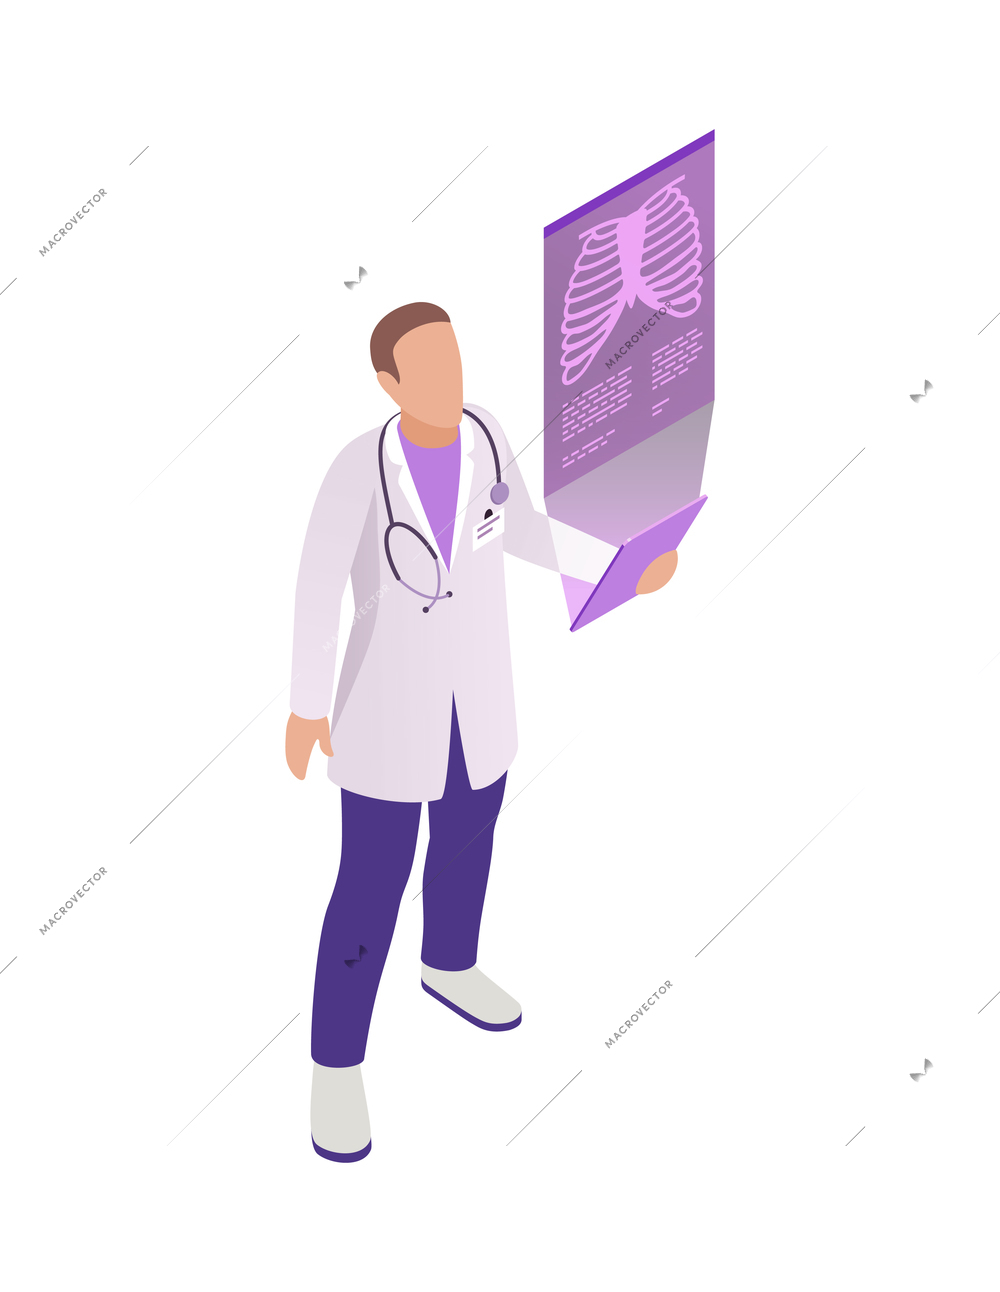 Telemedicine digital health glow isometric composition with isolated remote medical aid images vector illustration